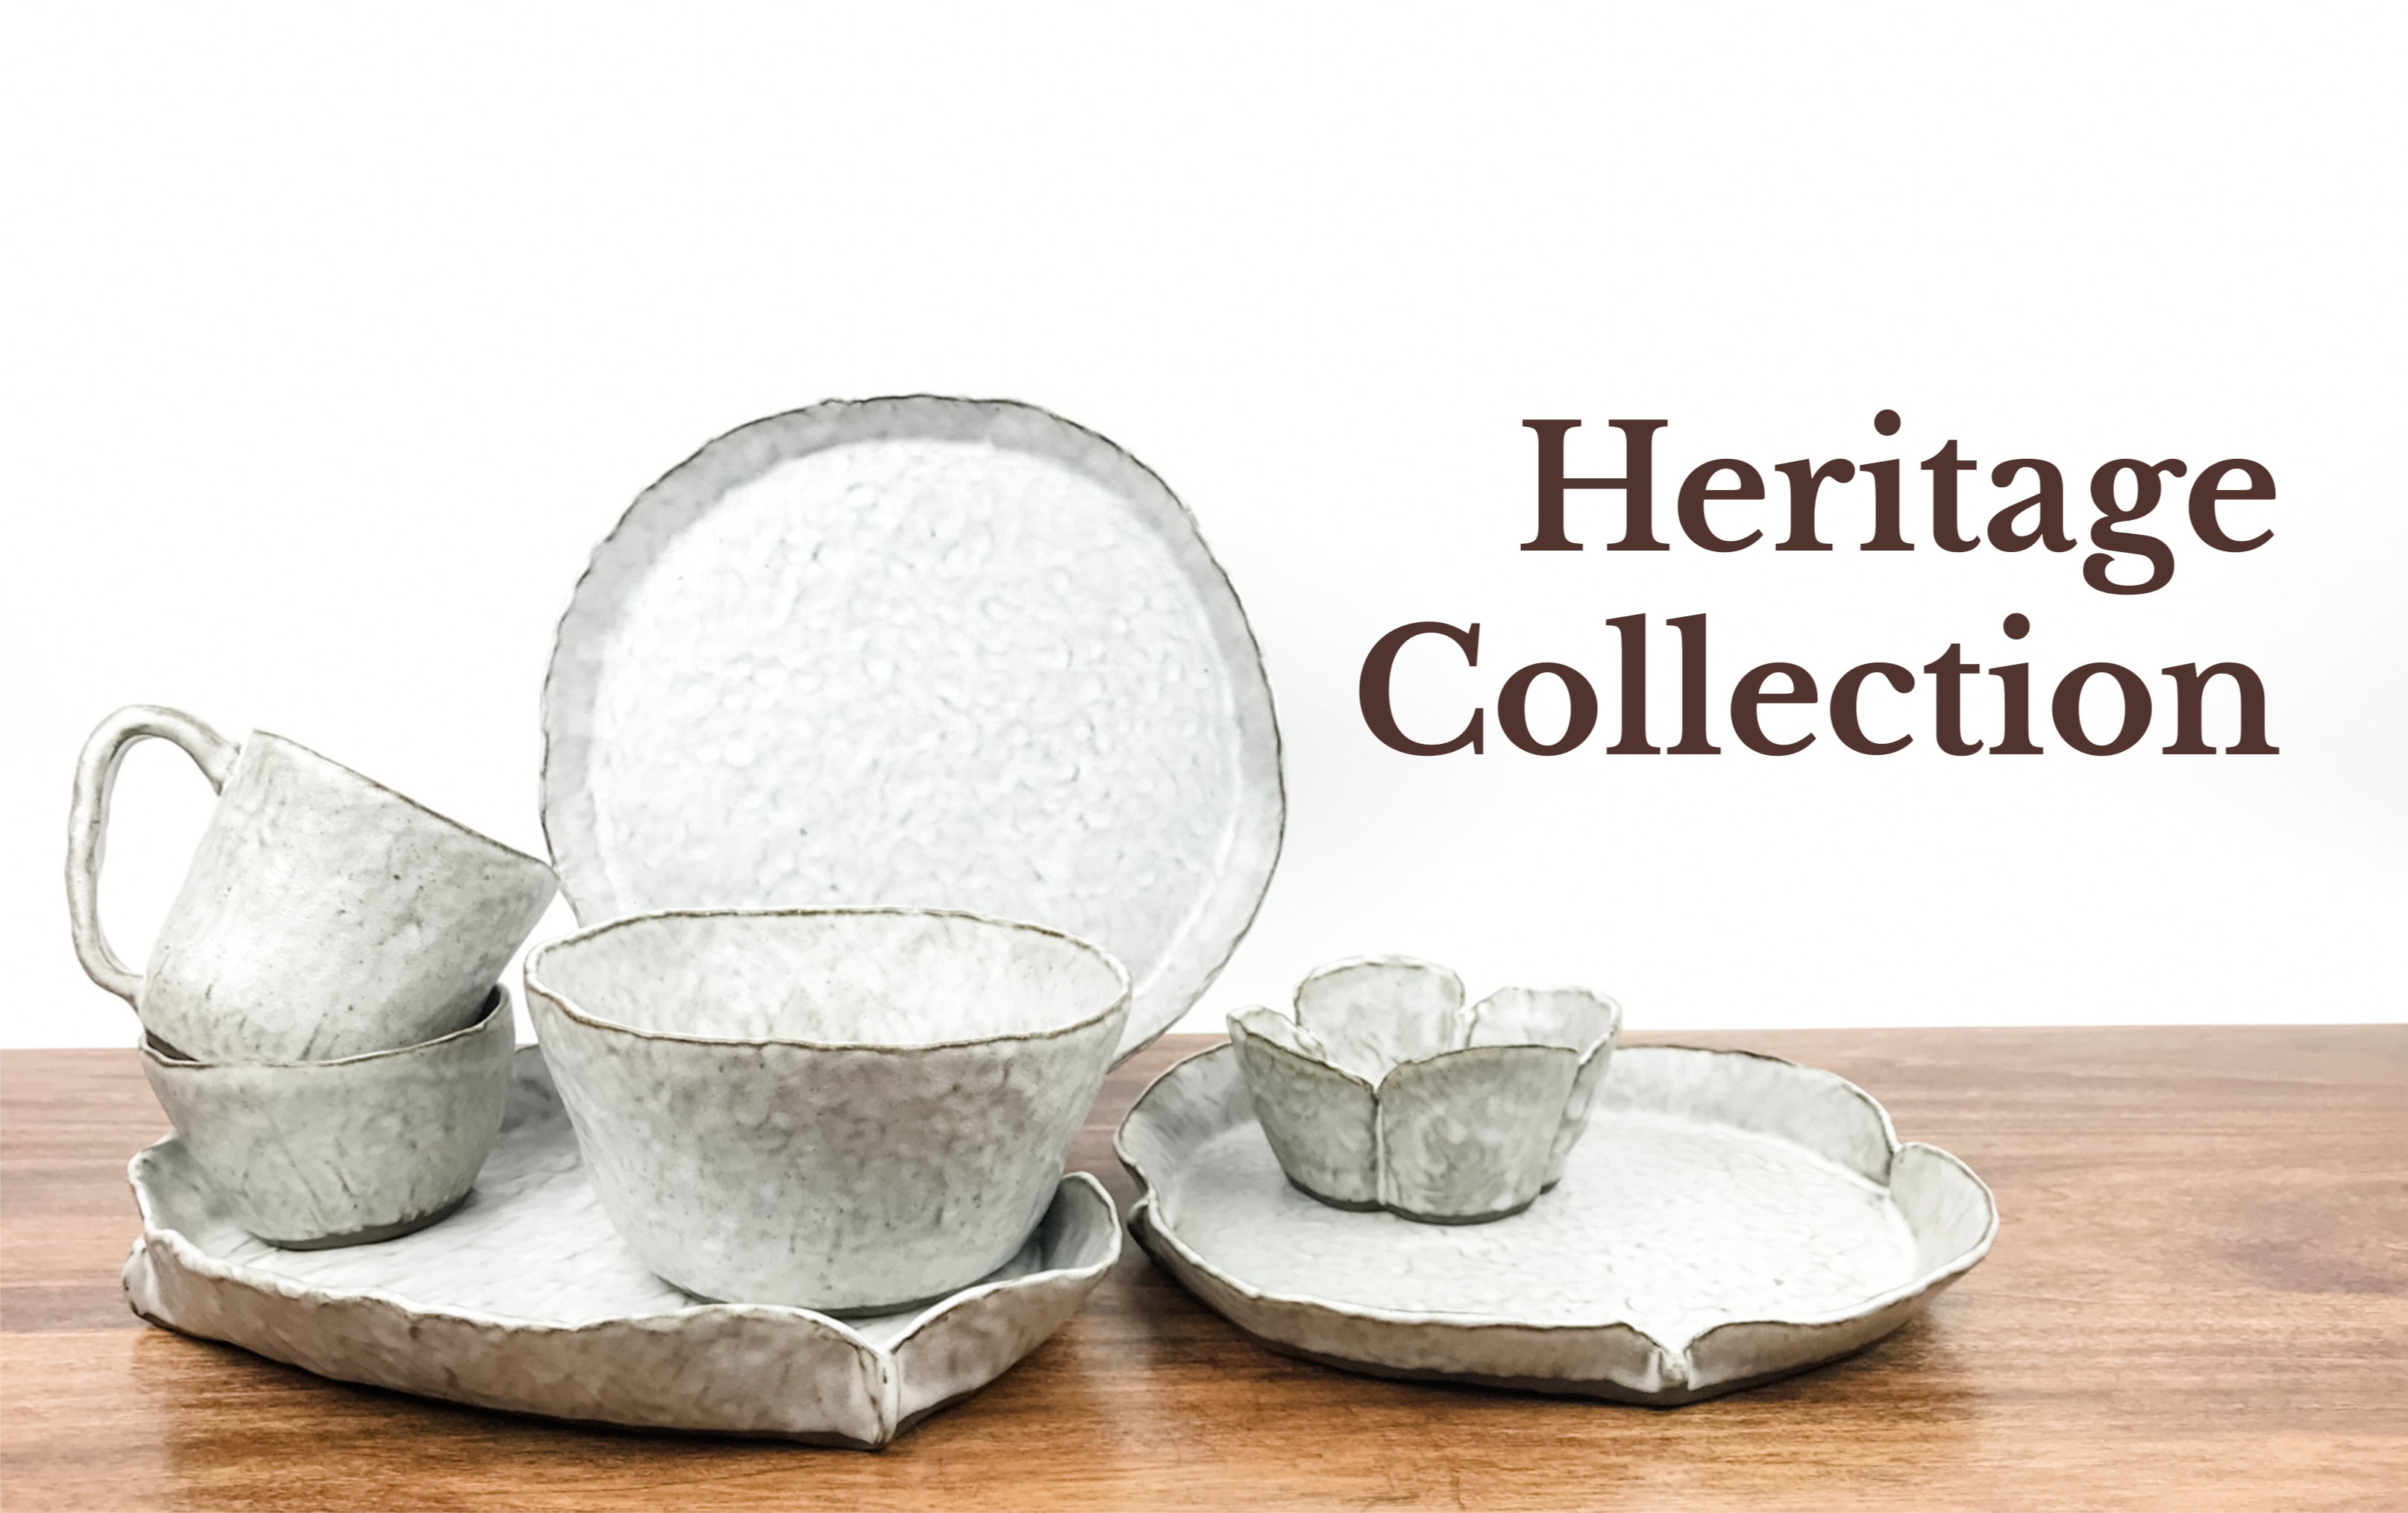 Handmade Pottery Heritage Collection